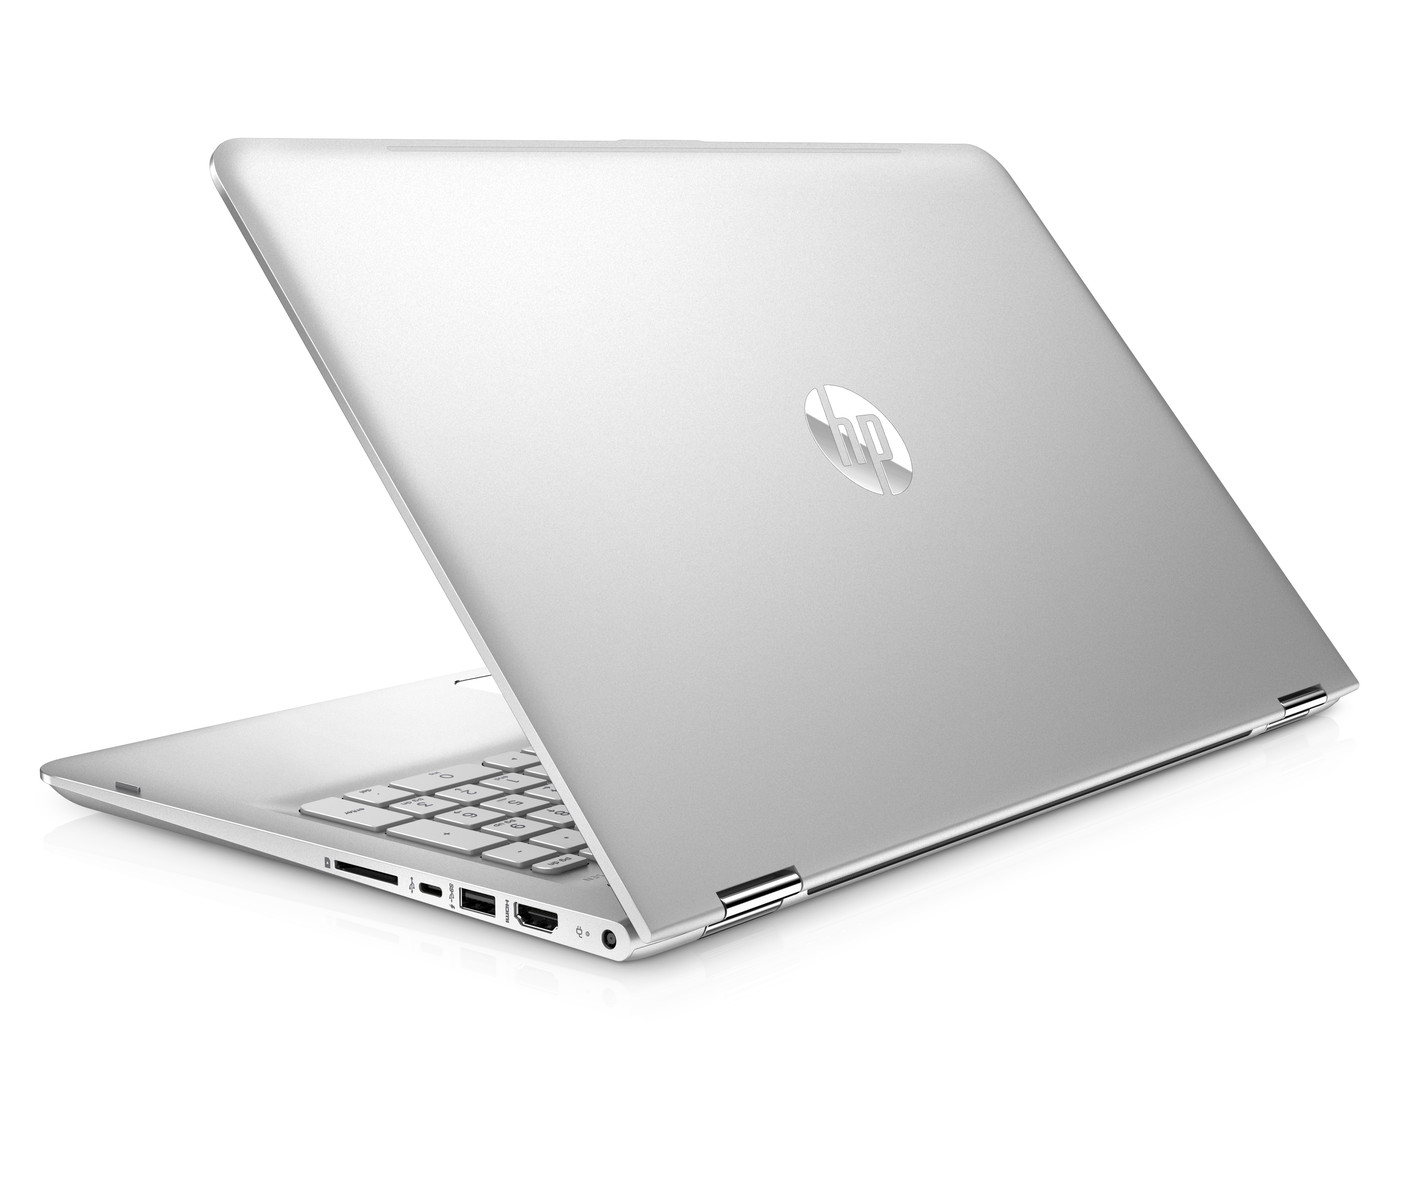 HP unveils 15.6-inch and 17.3-inch Envy 2016 notebooks; refreshes Envy x360 - NotebookCheck.net News